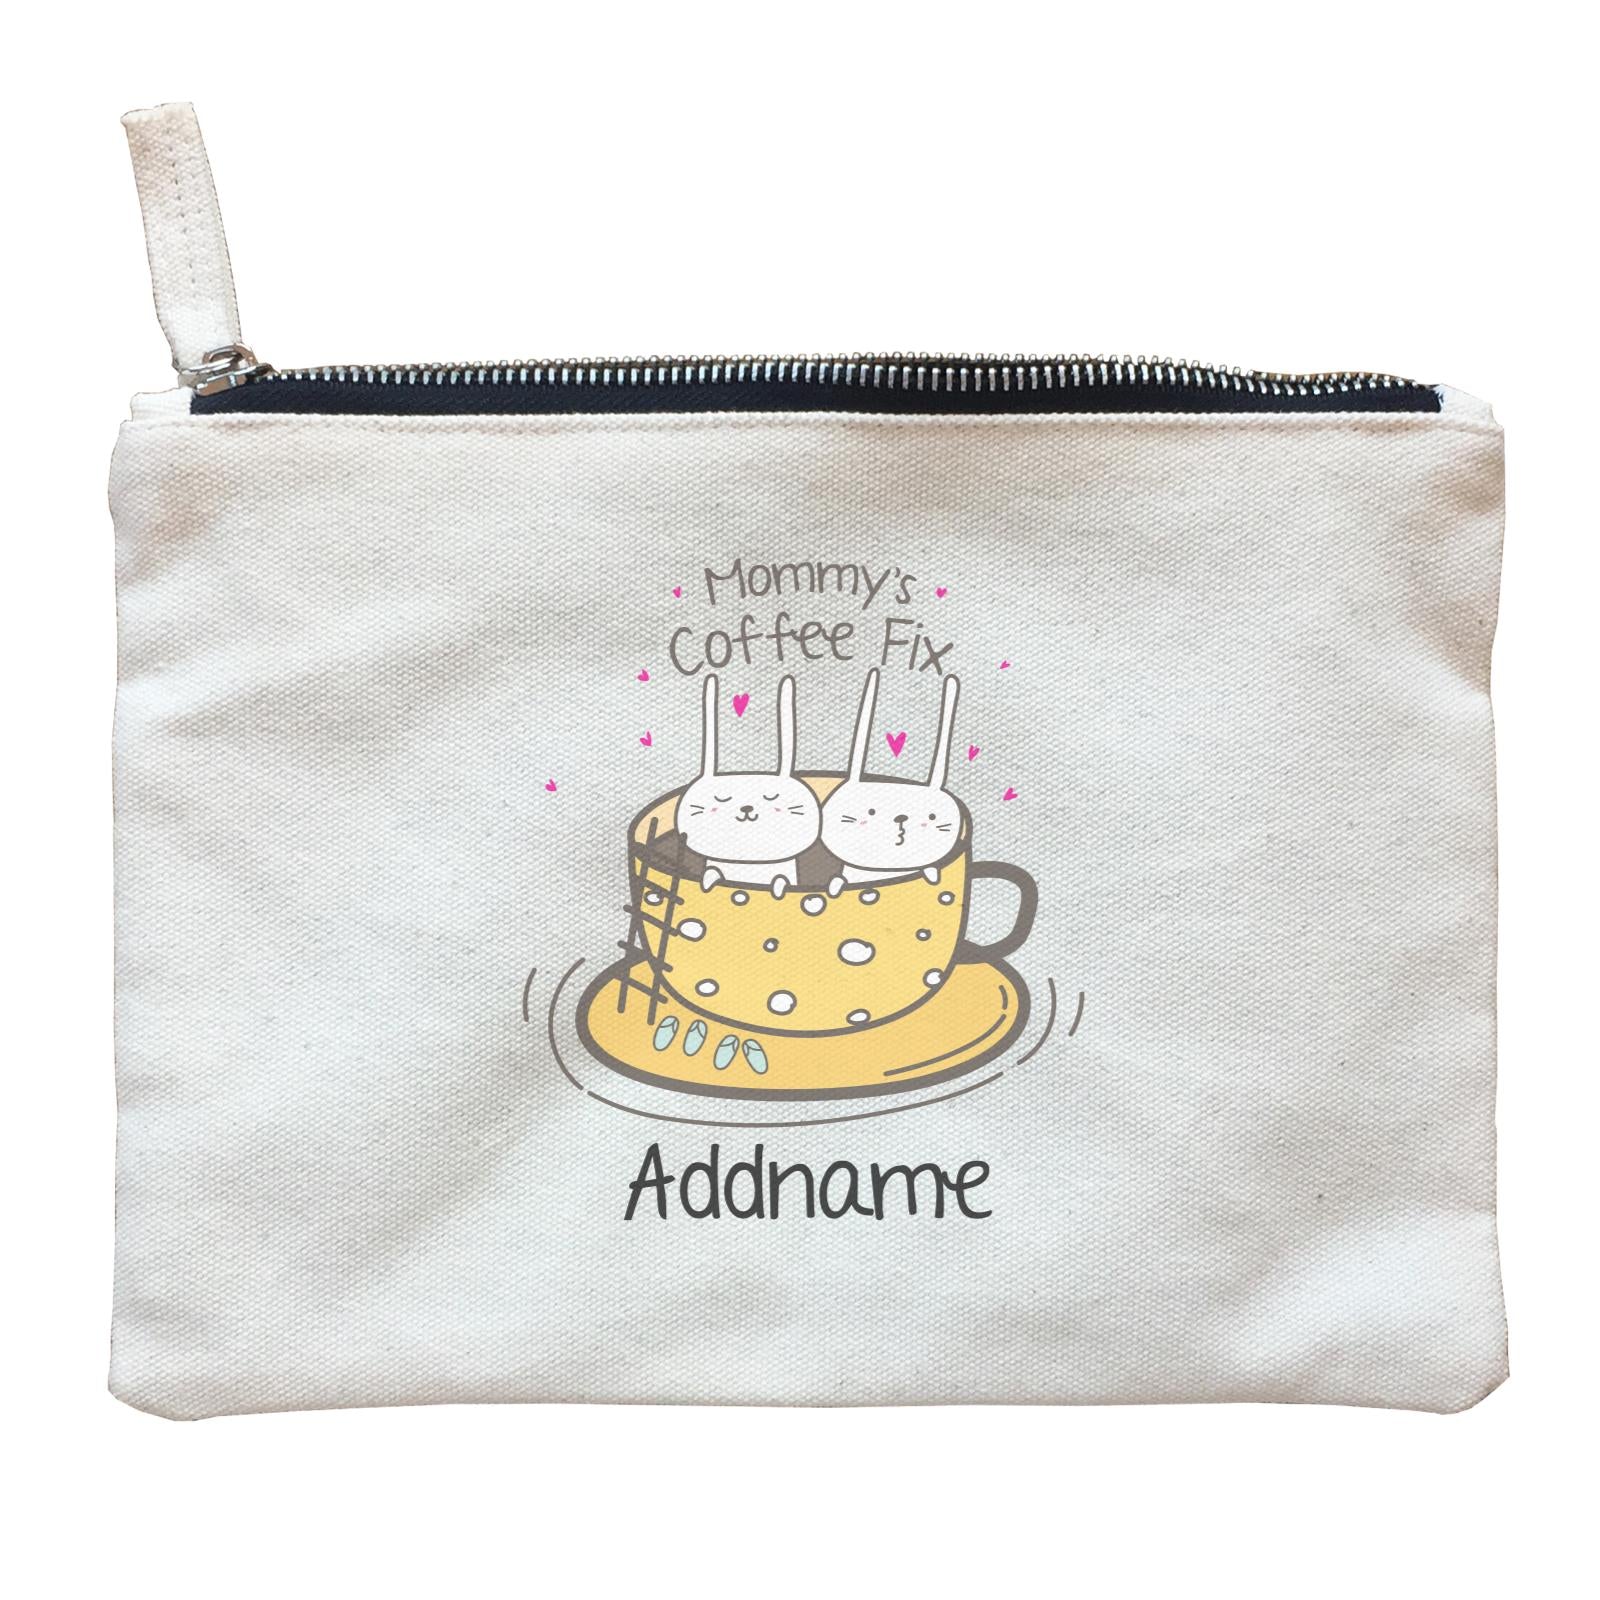 Cute Animals And Friends Series Mommy Coffee Fix Bunny Addname Zipper Pouch